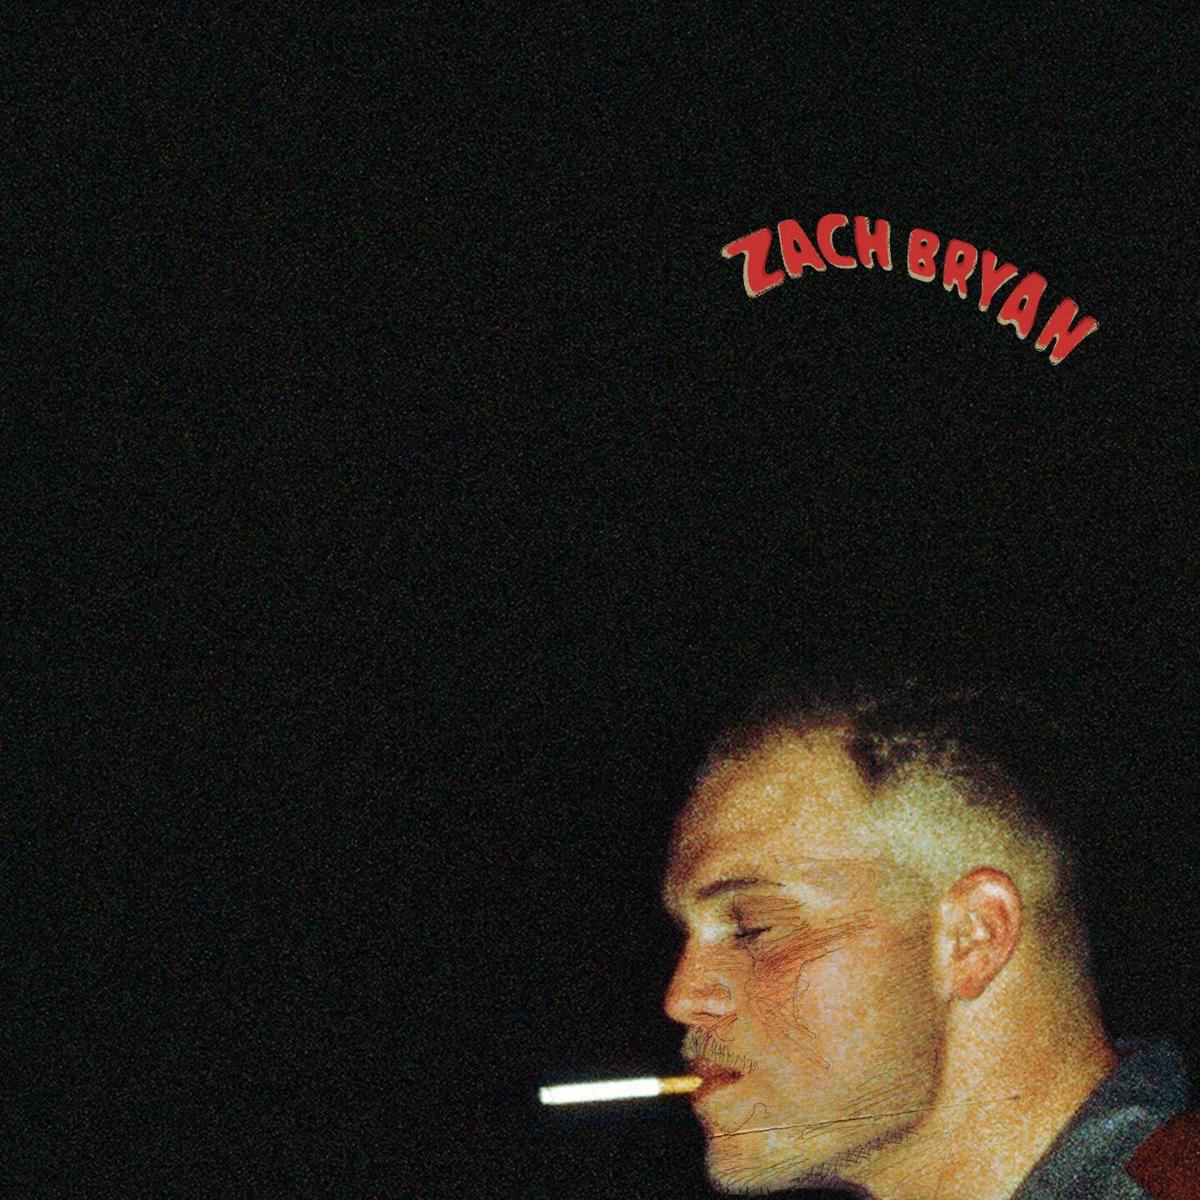 Zach Bryan released new album Friday, tour dates coming soon